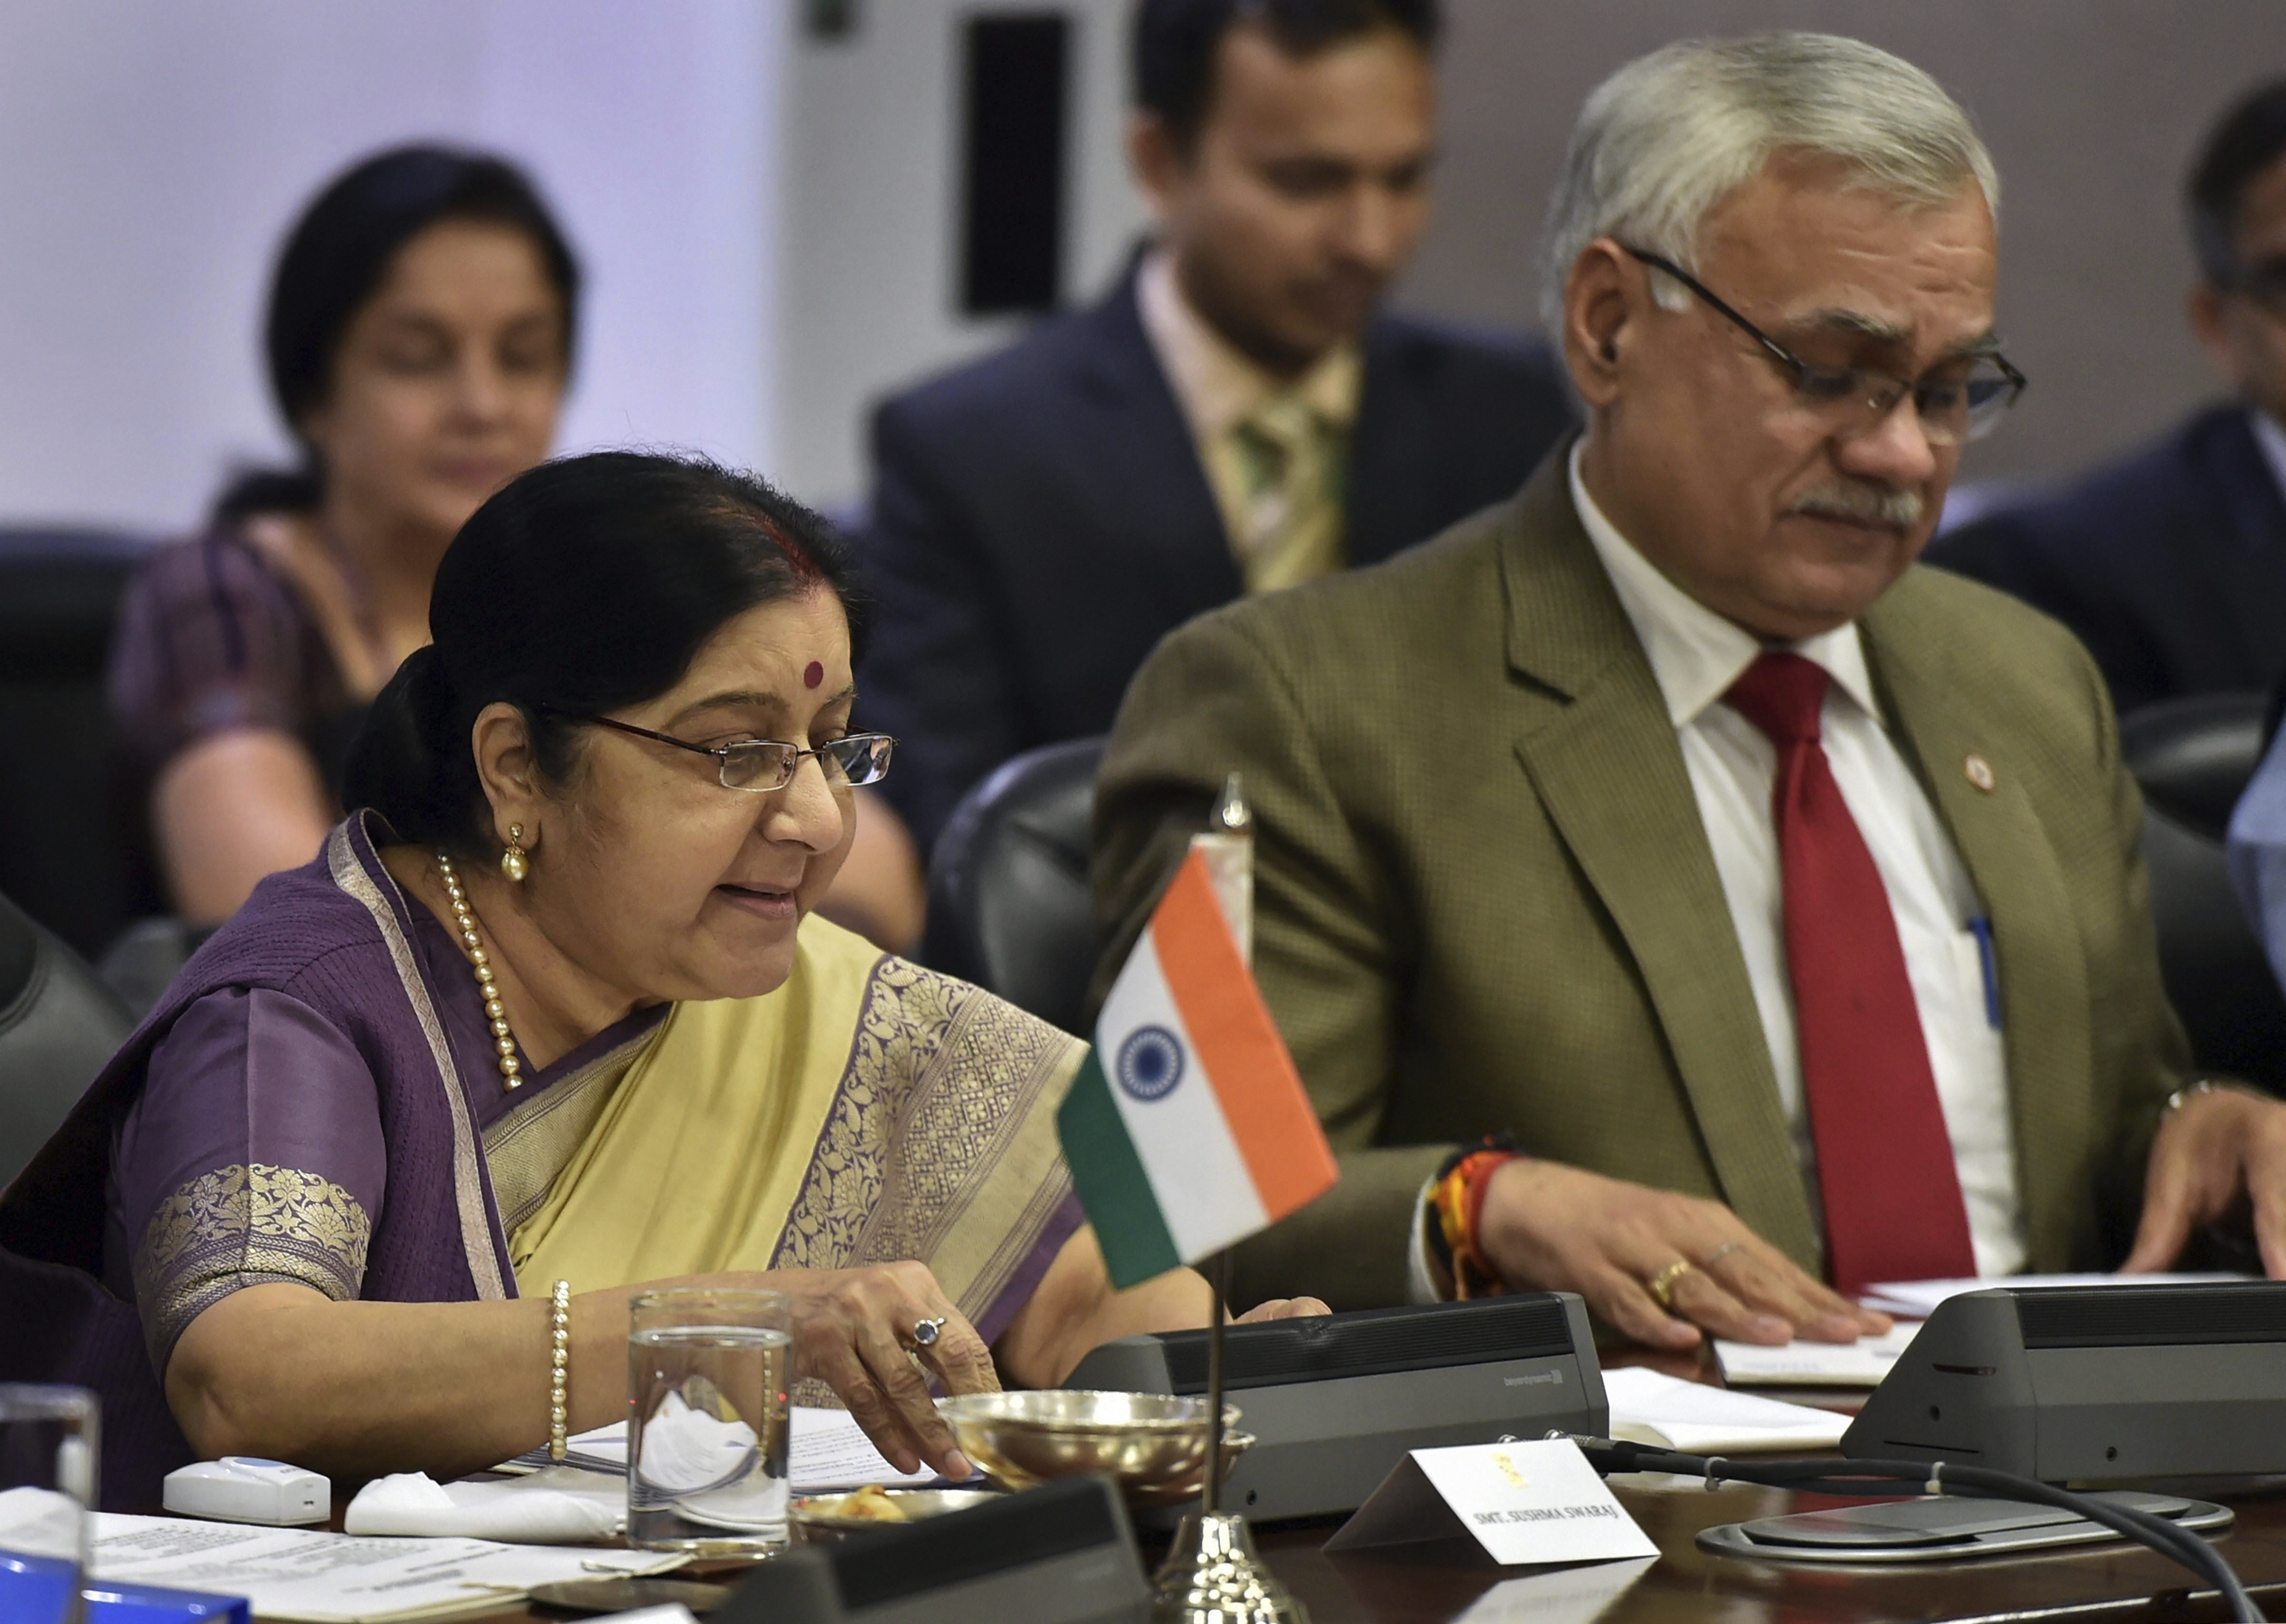 External Affairs Minister Sushma Swaraj during a meeting with her Danish counterpart Anders Samuelsen (unseen), in New Delhi - PTI